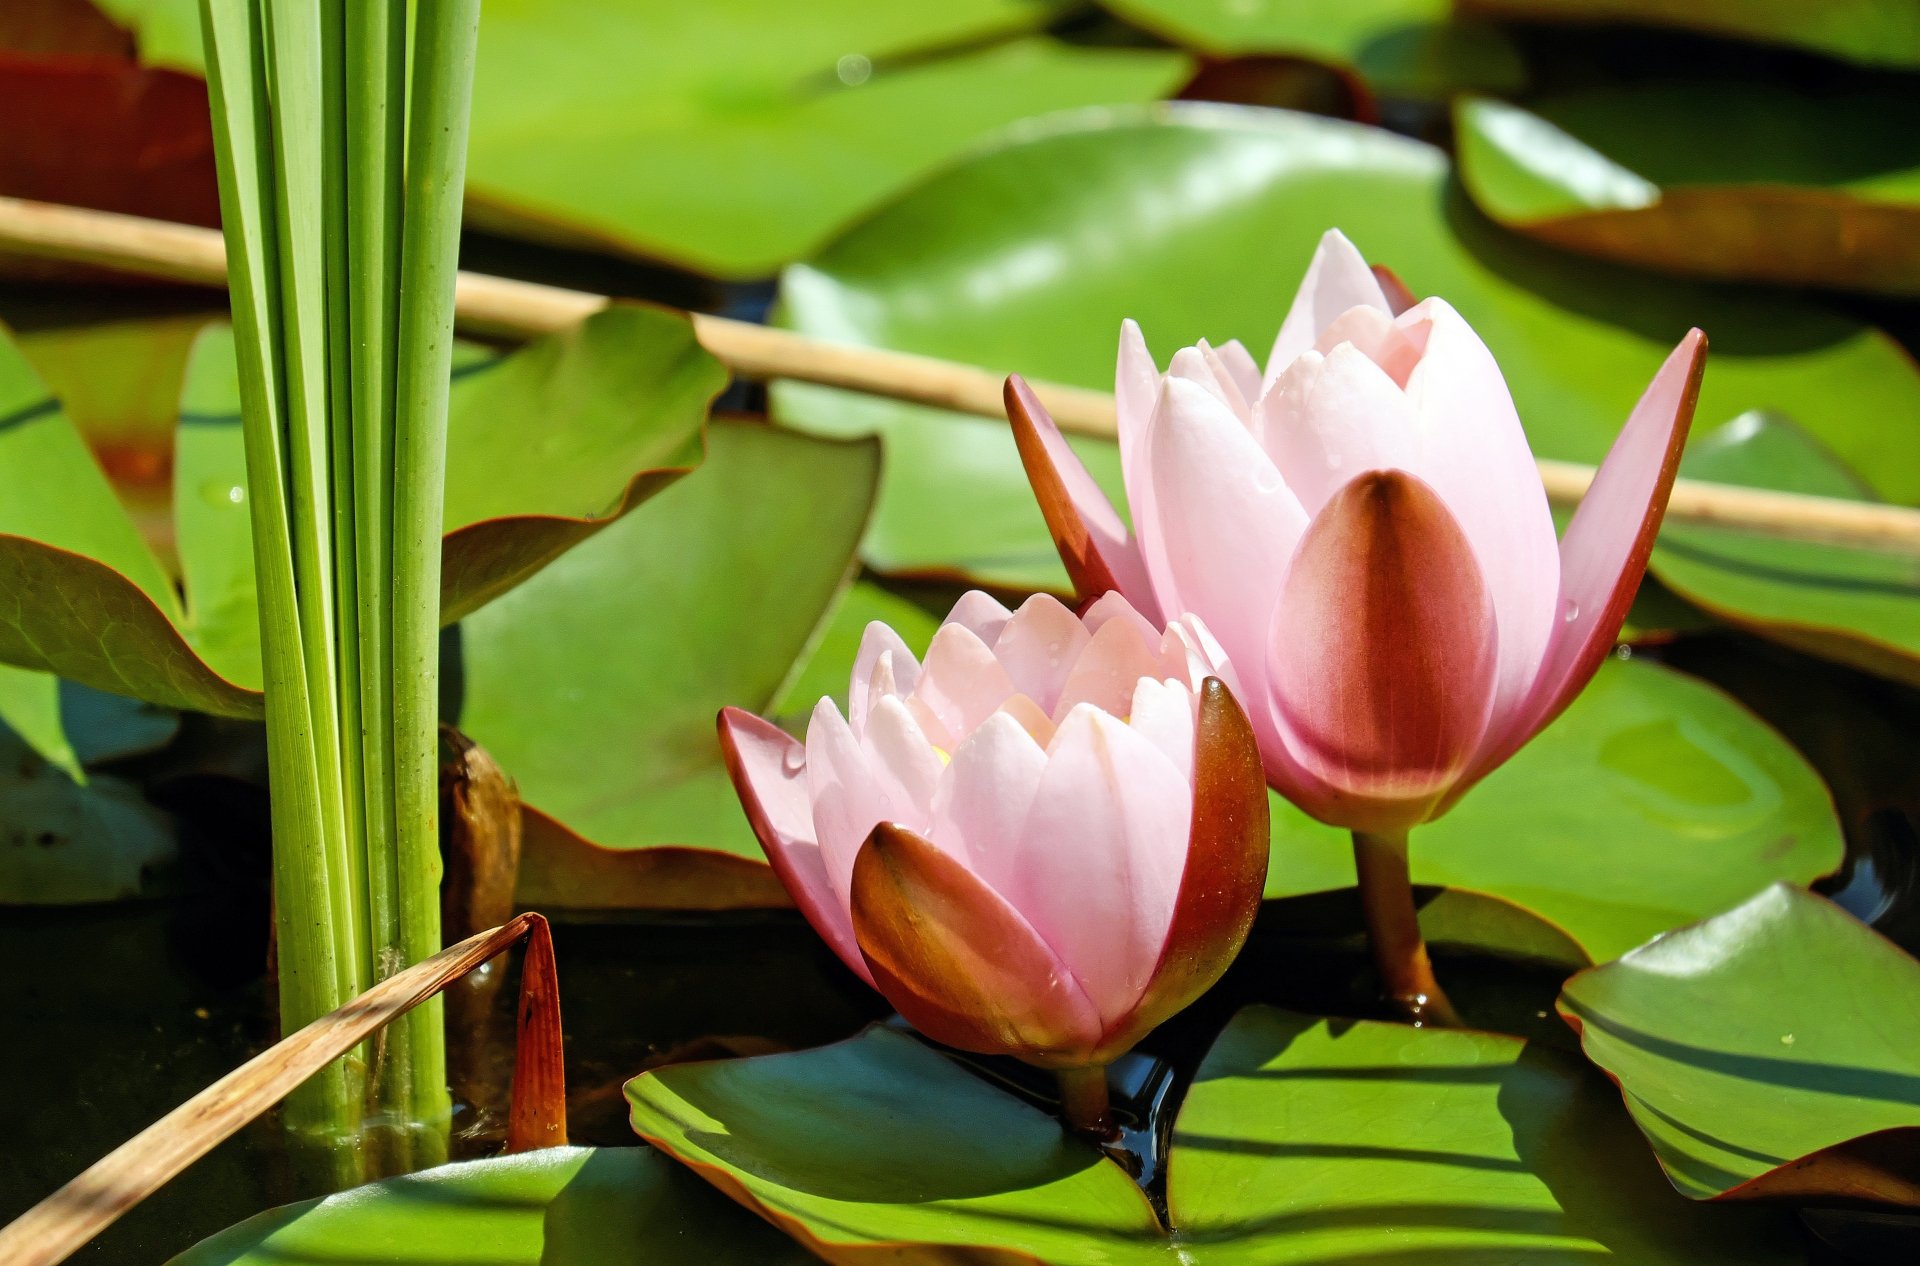 Water Lily 4k Ultra HD Wallpaper by Couleur